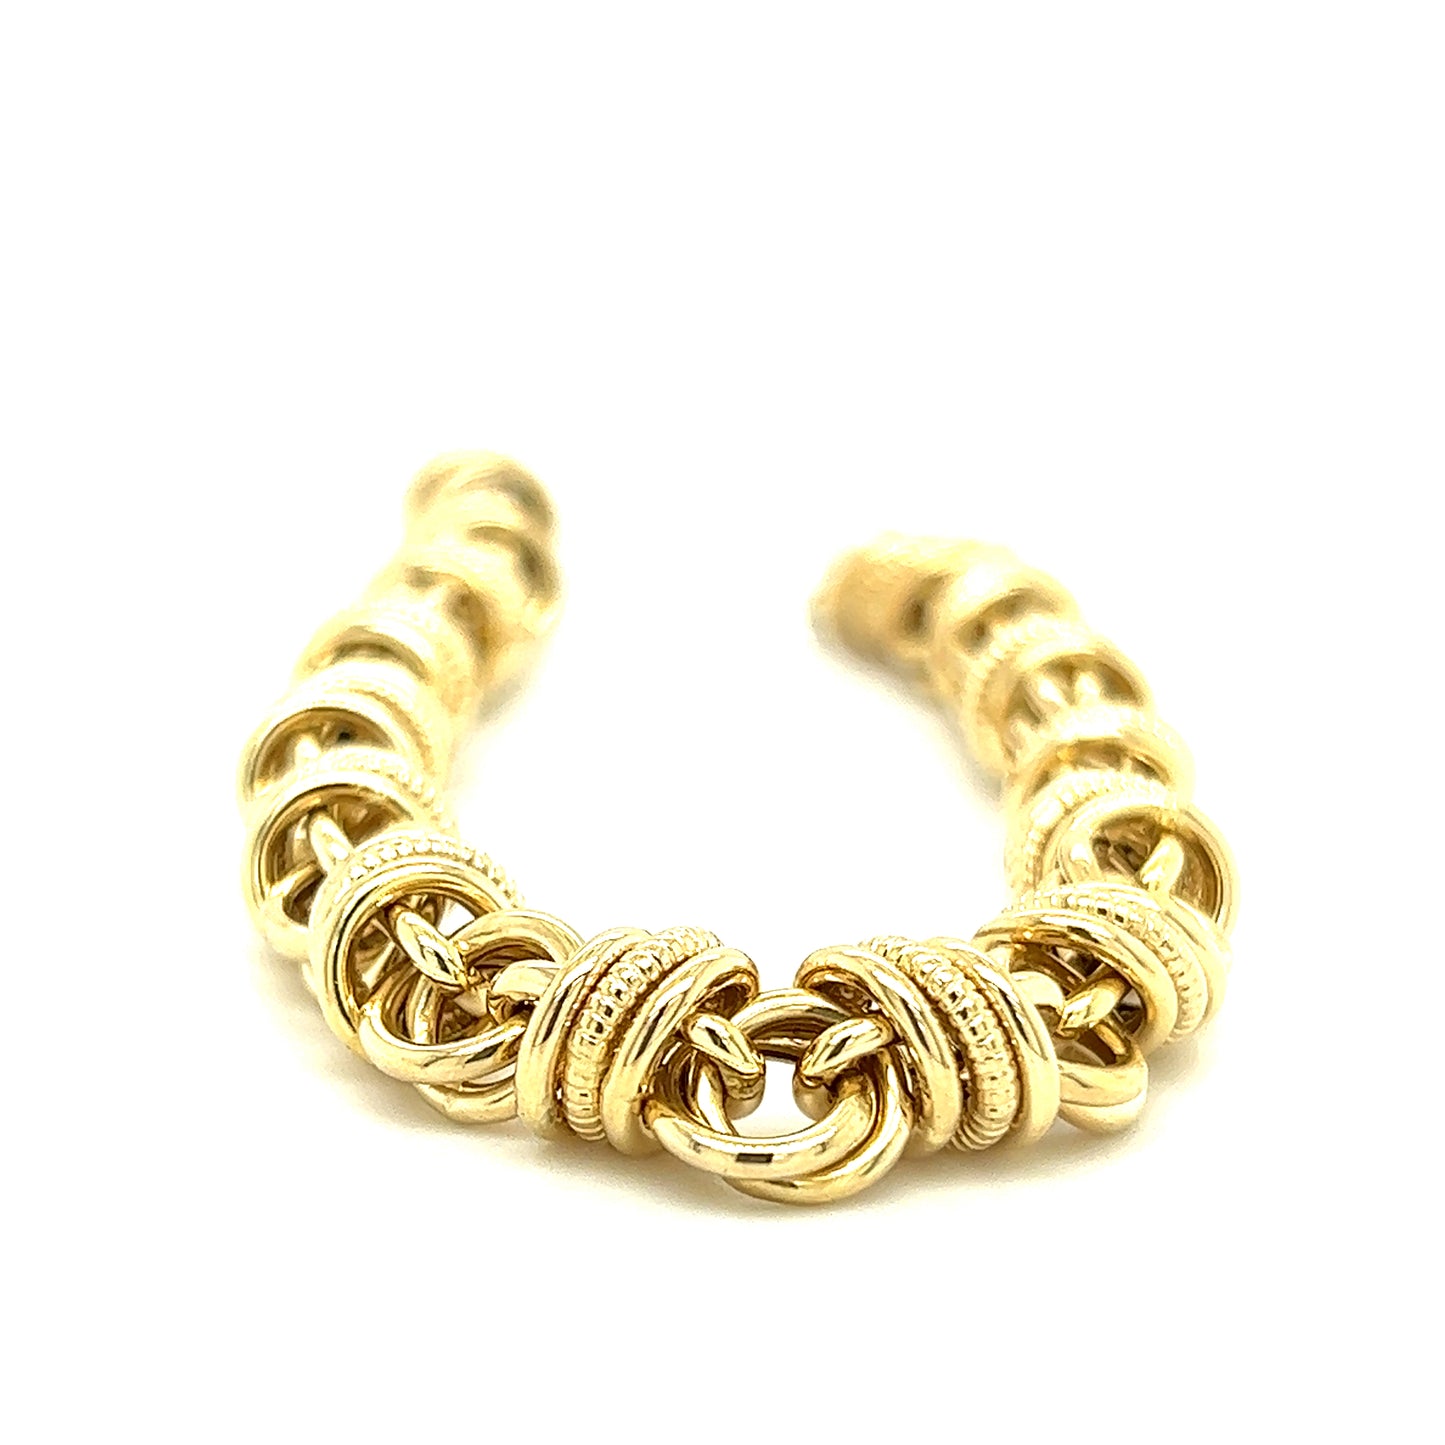 Double Link Bracelet with Loose Rings in 14K Yellow Gold Links View